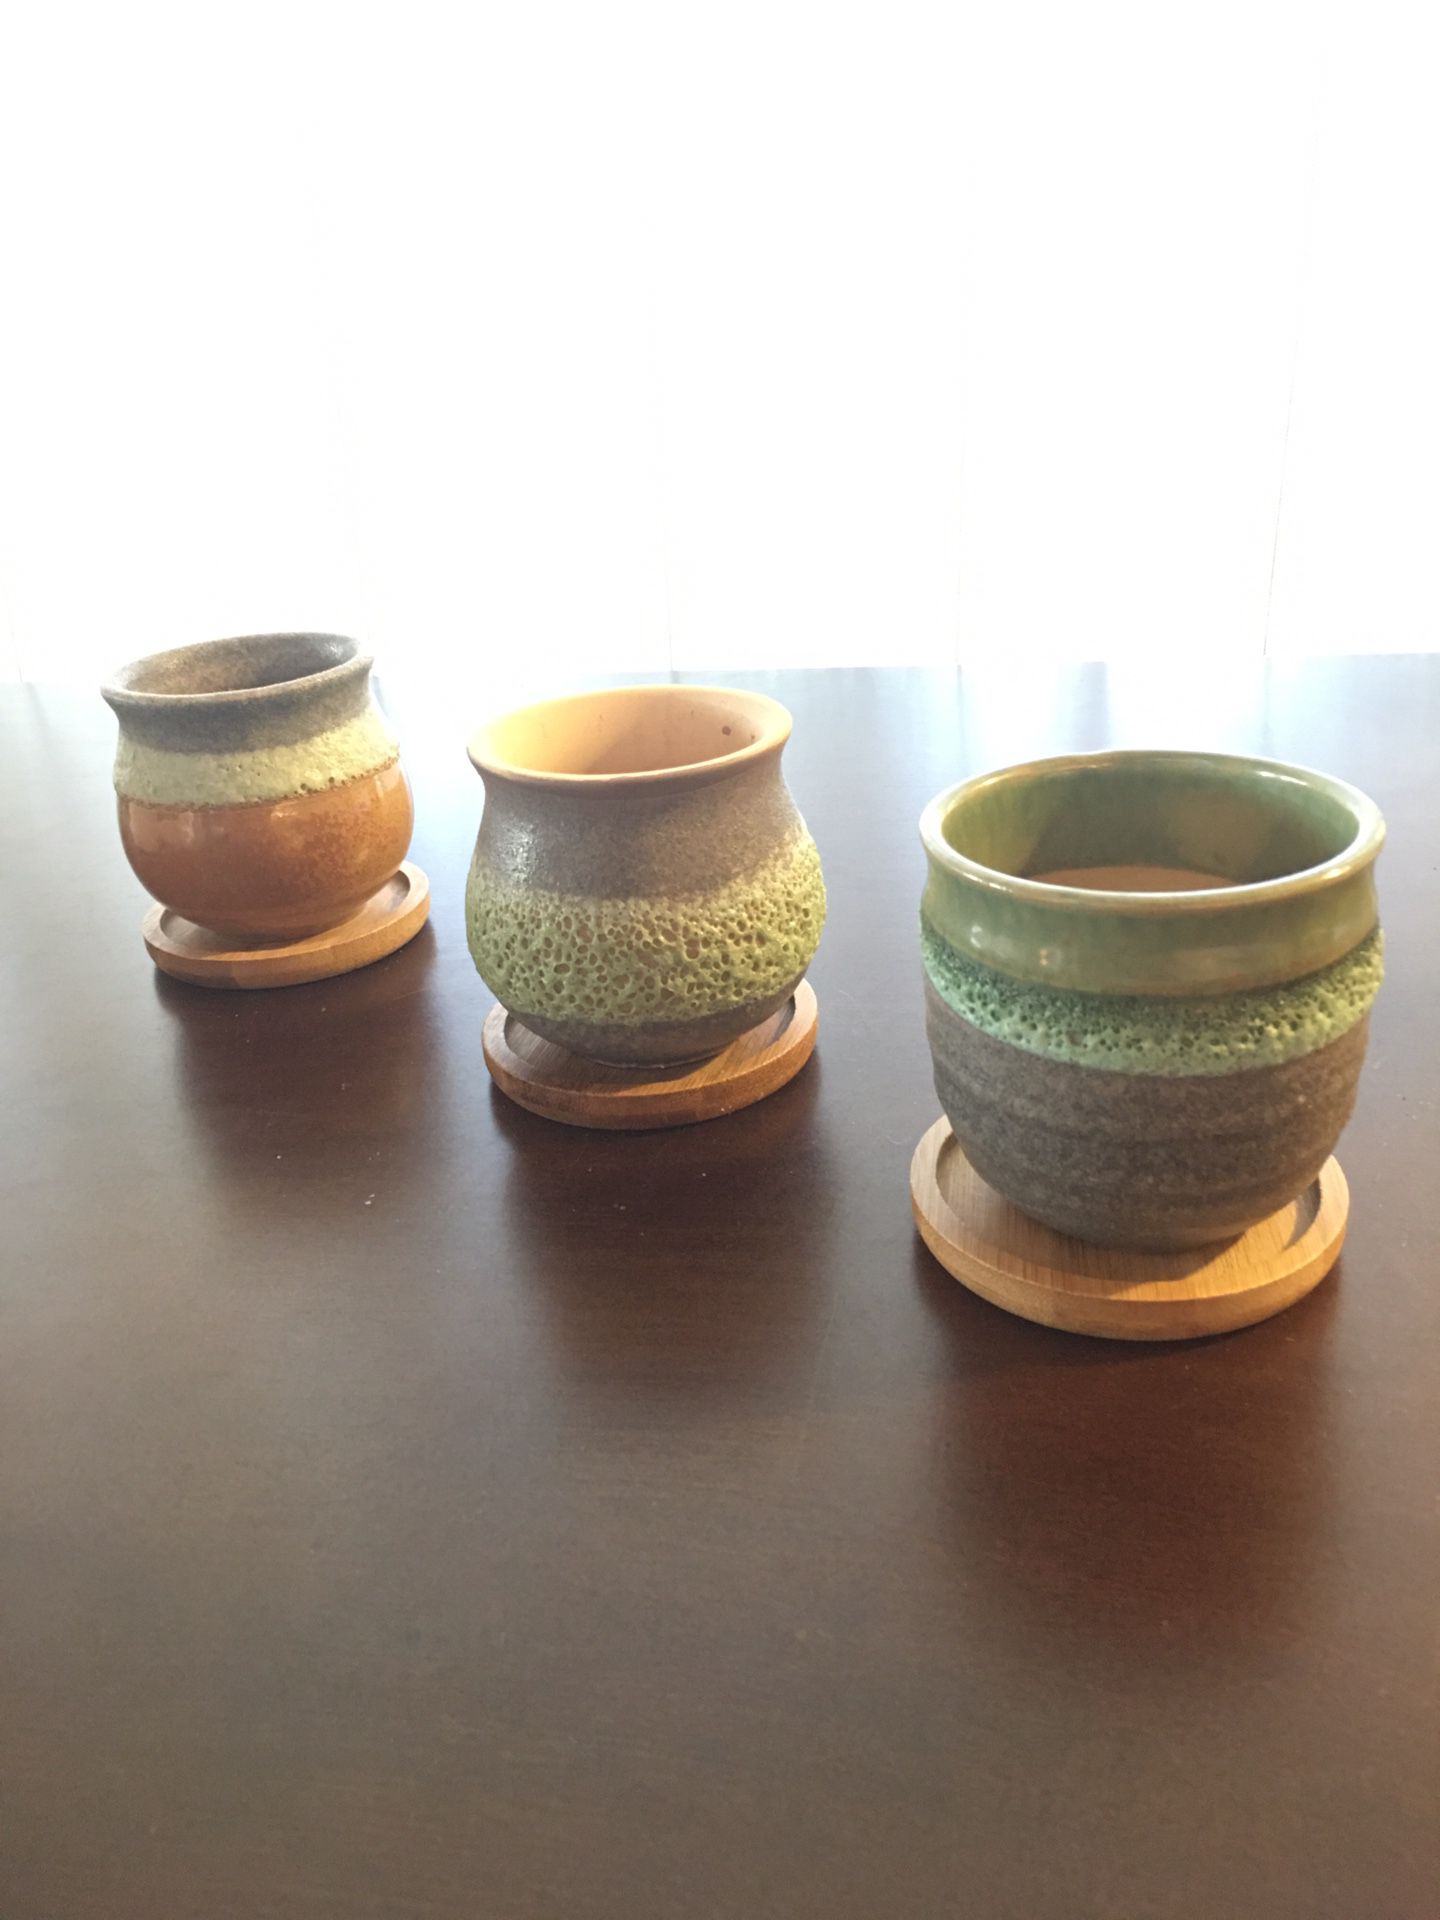 Succulent Pots!! with bamboo trays - 3 Adorable Ceramic Cactus Pots with Bamboo Coasters